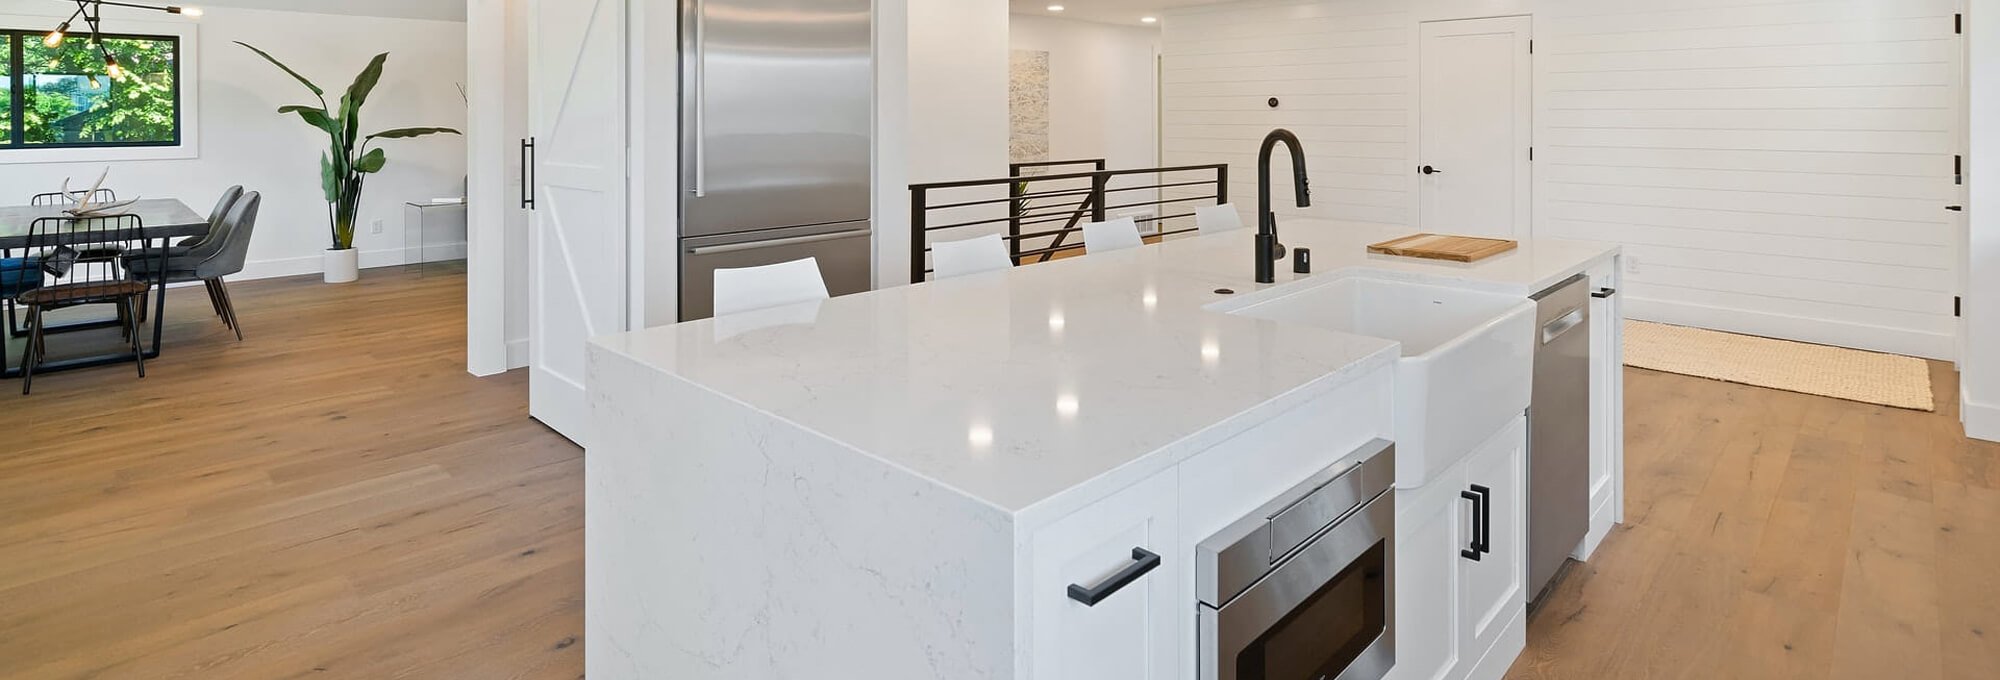 Countertops from Fashion Carpet & Rug in Manassas